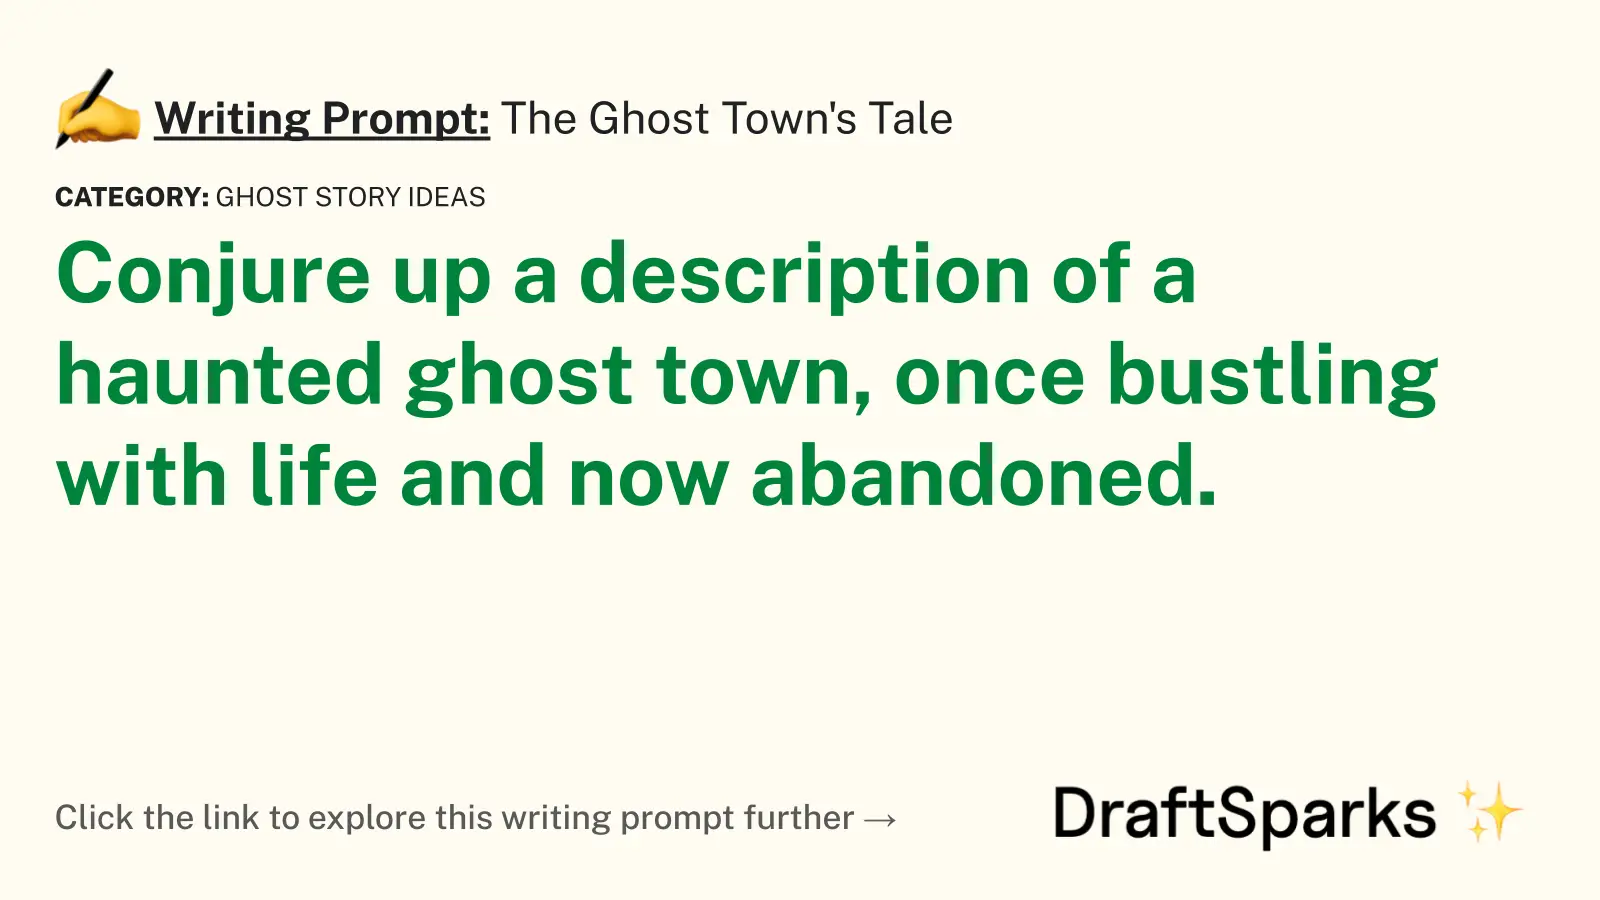 The Ghost Town’s Tale